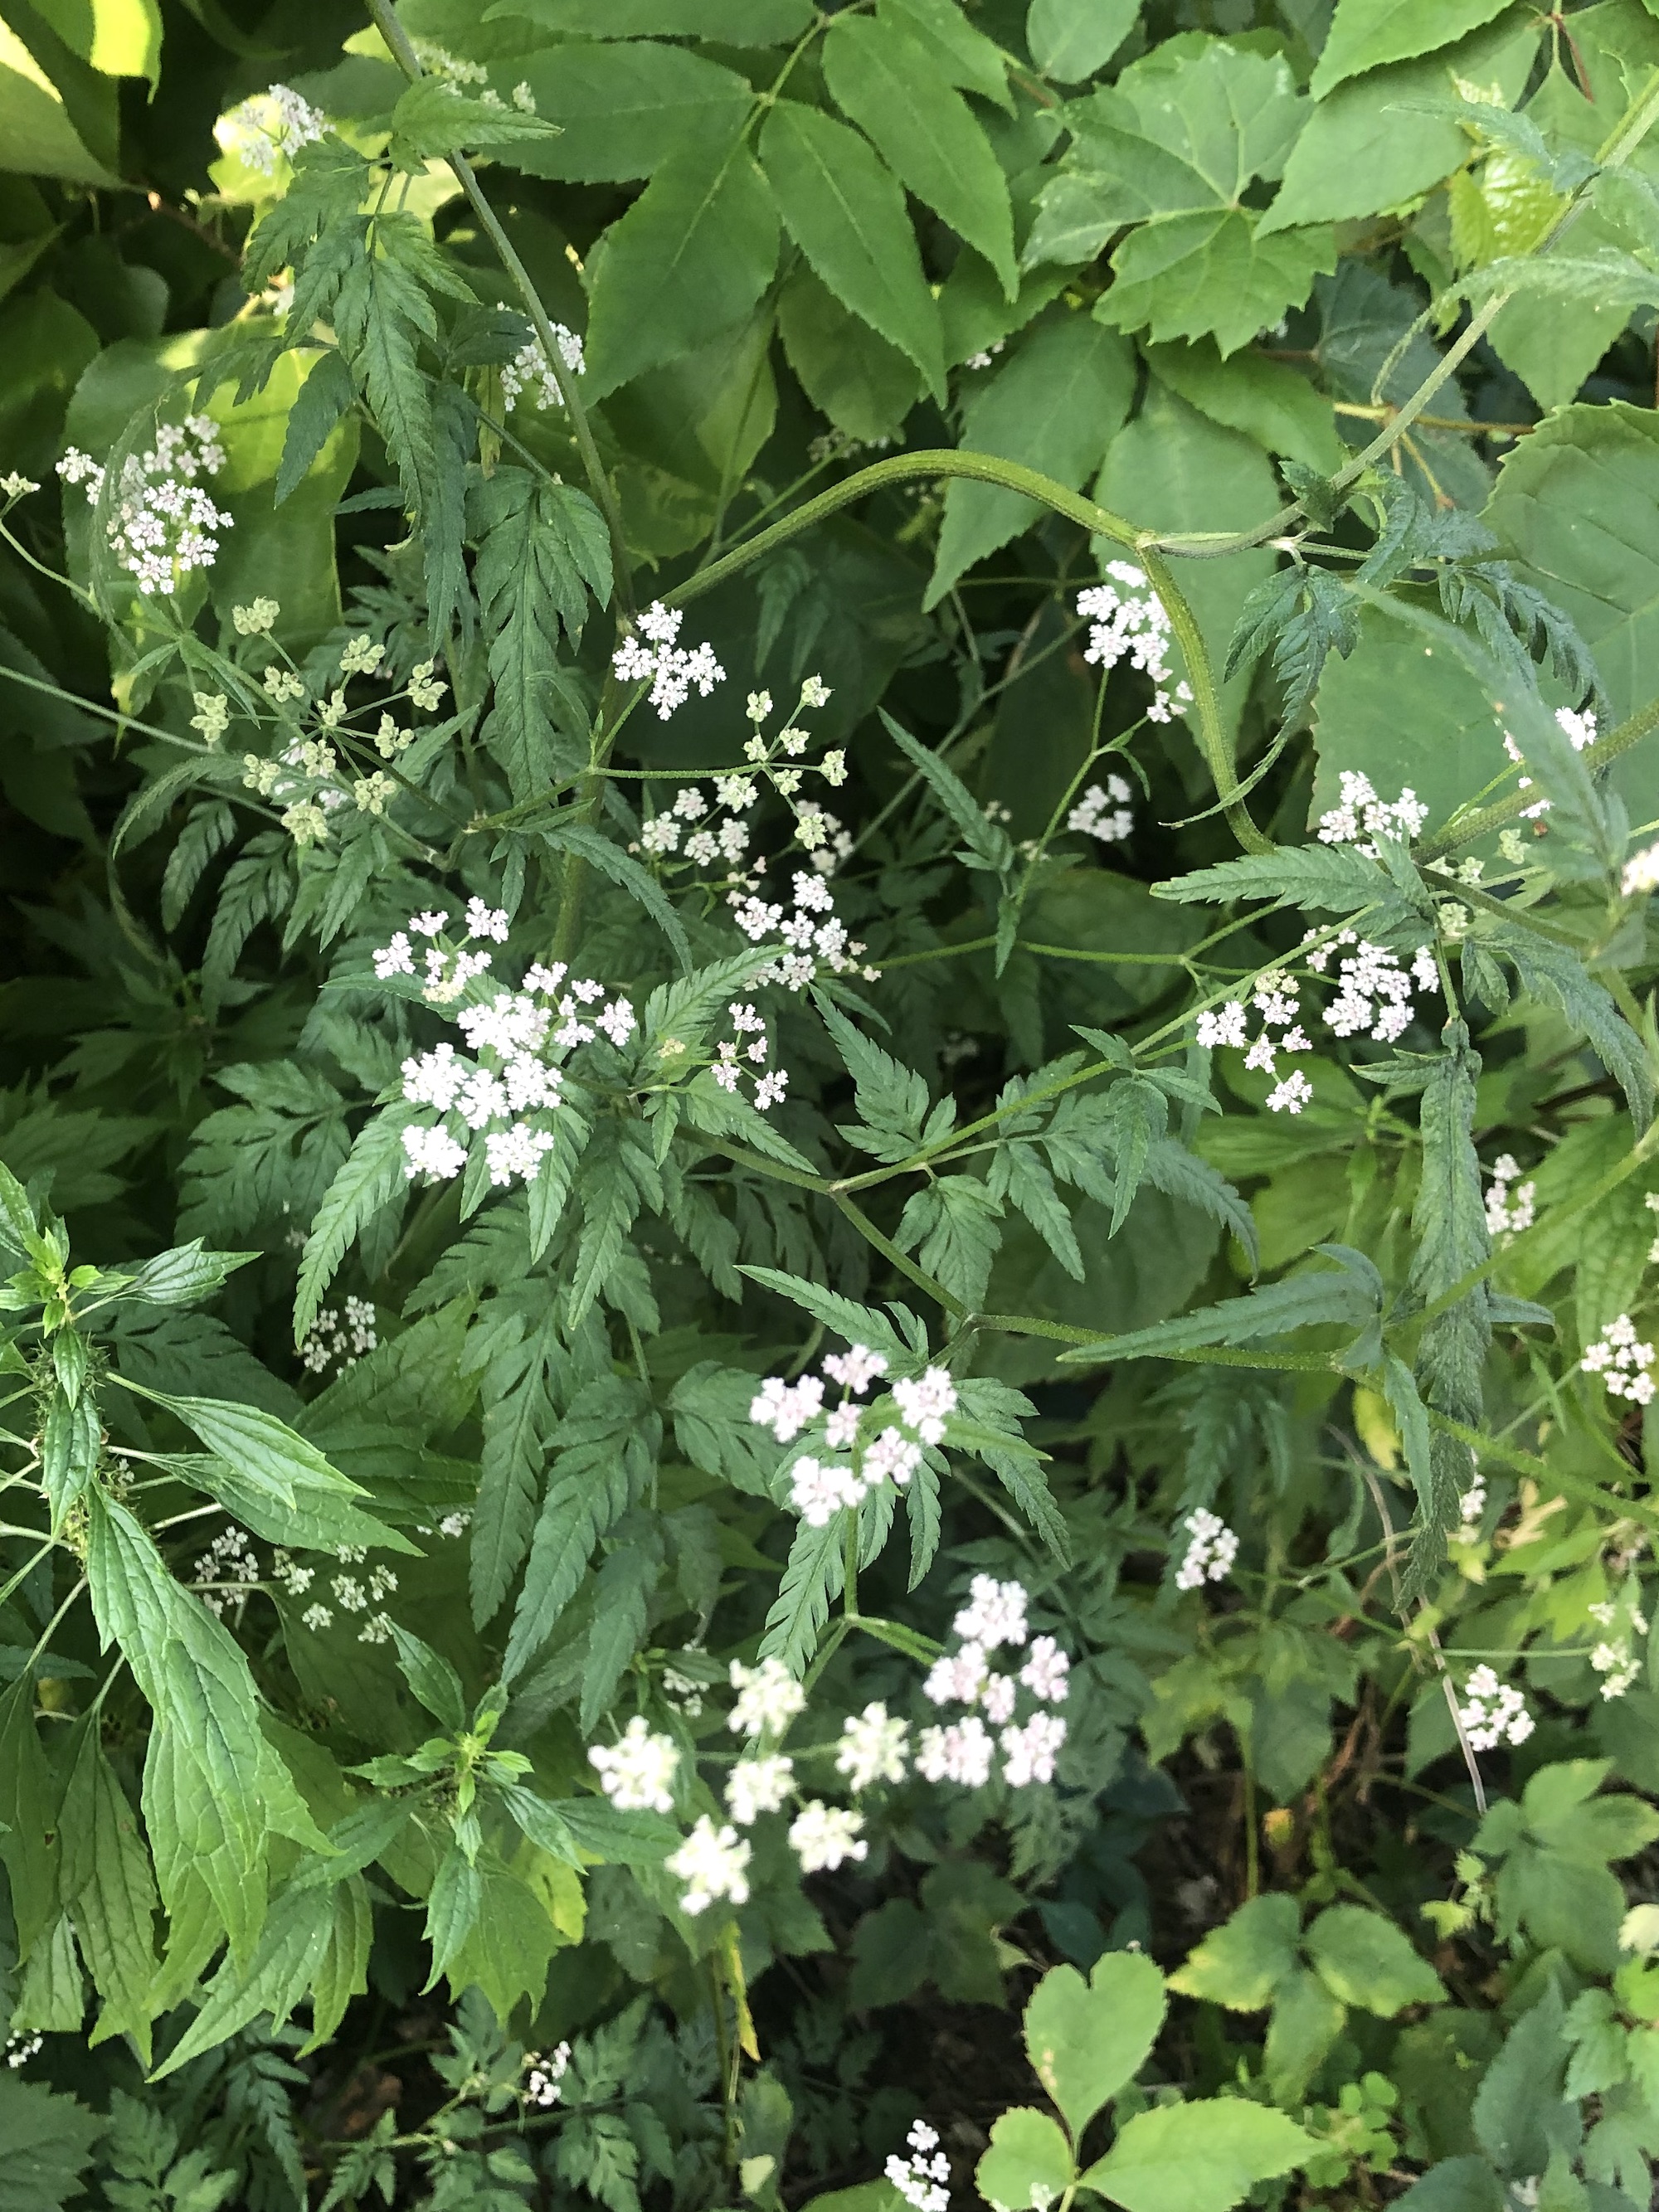 Hedge Parsley plant in Madison, Wisconsin on July 20, 2022.